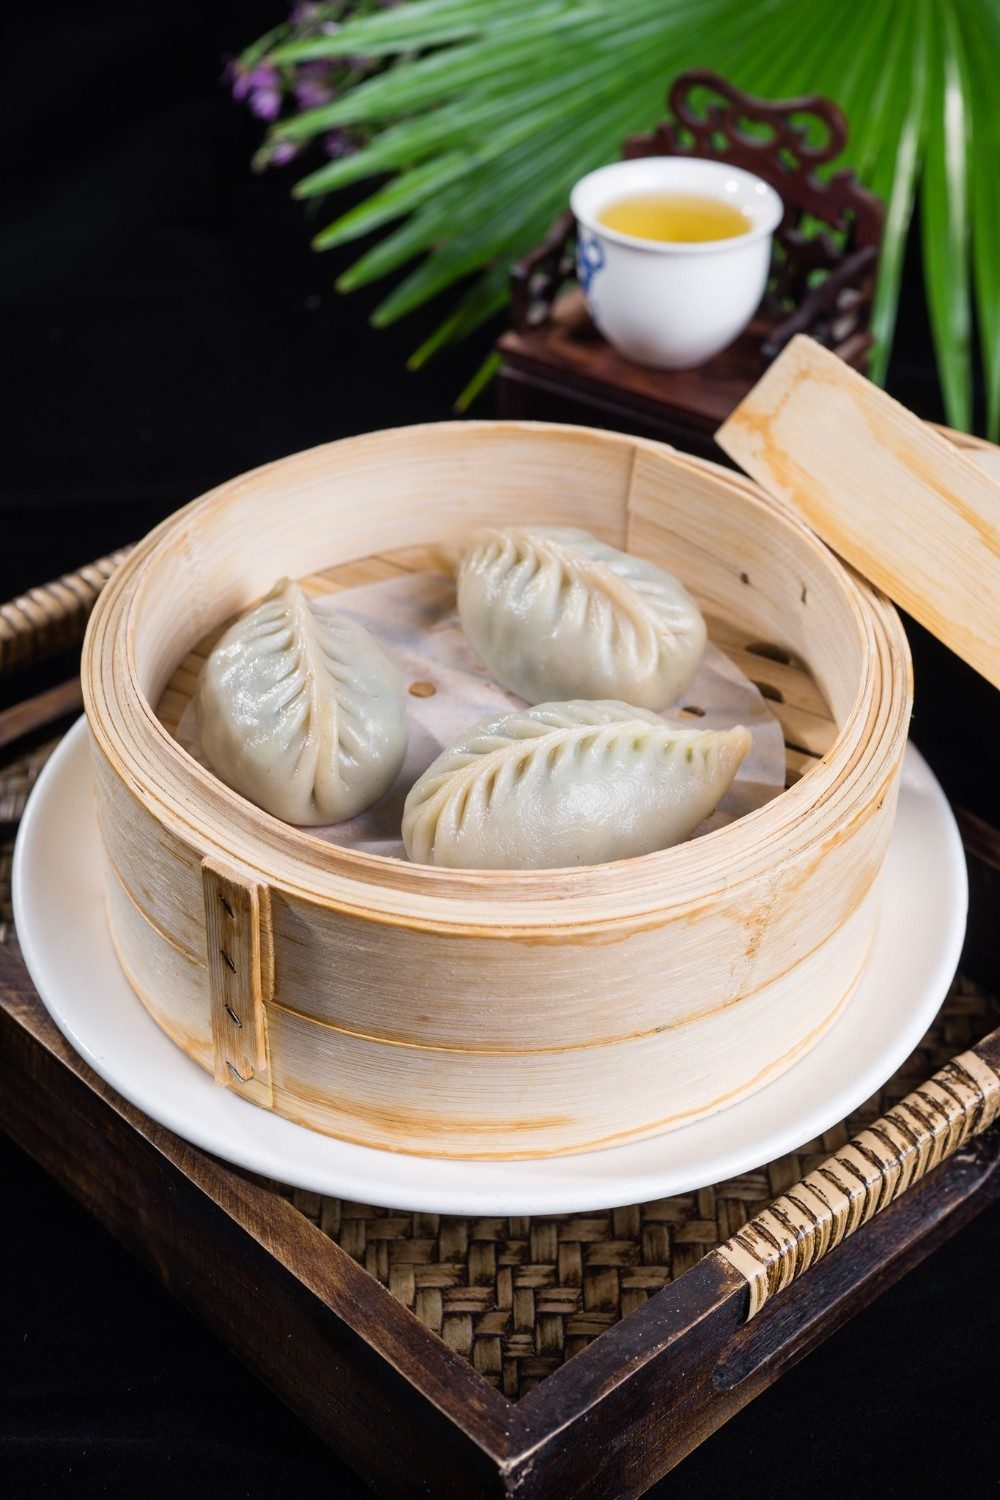 The best Cebuano dim sum restaurants for the Chinese New Year